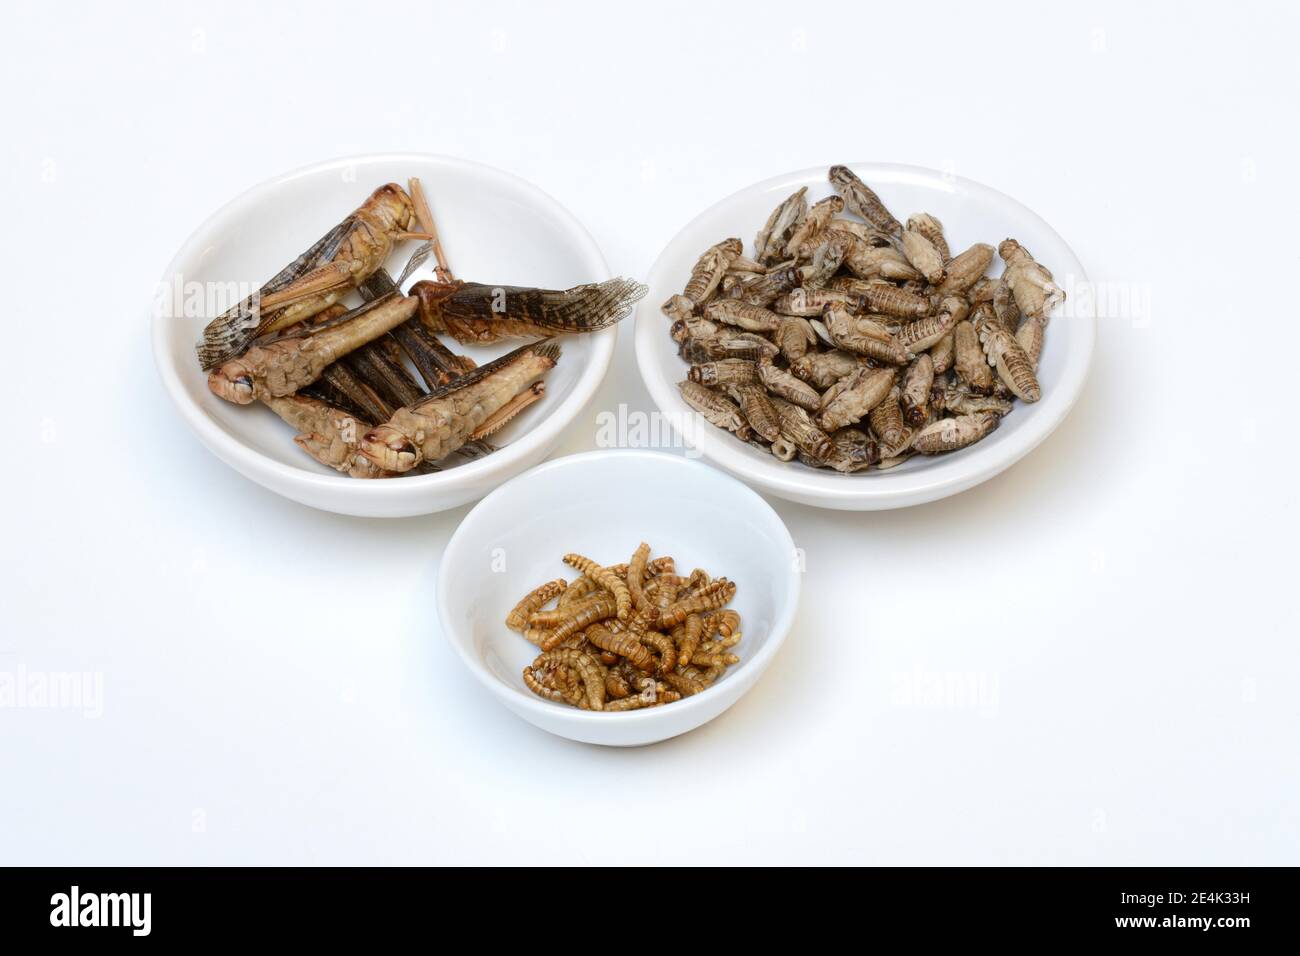 Insect food, various dried insects in shells, grasshoppers, crickets, mealworms(Locusta migratoria), Acheta domesticus, Tenebrio molitor Stock Photo